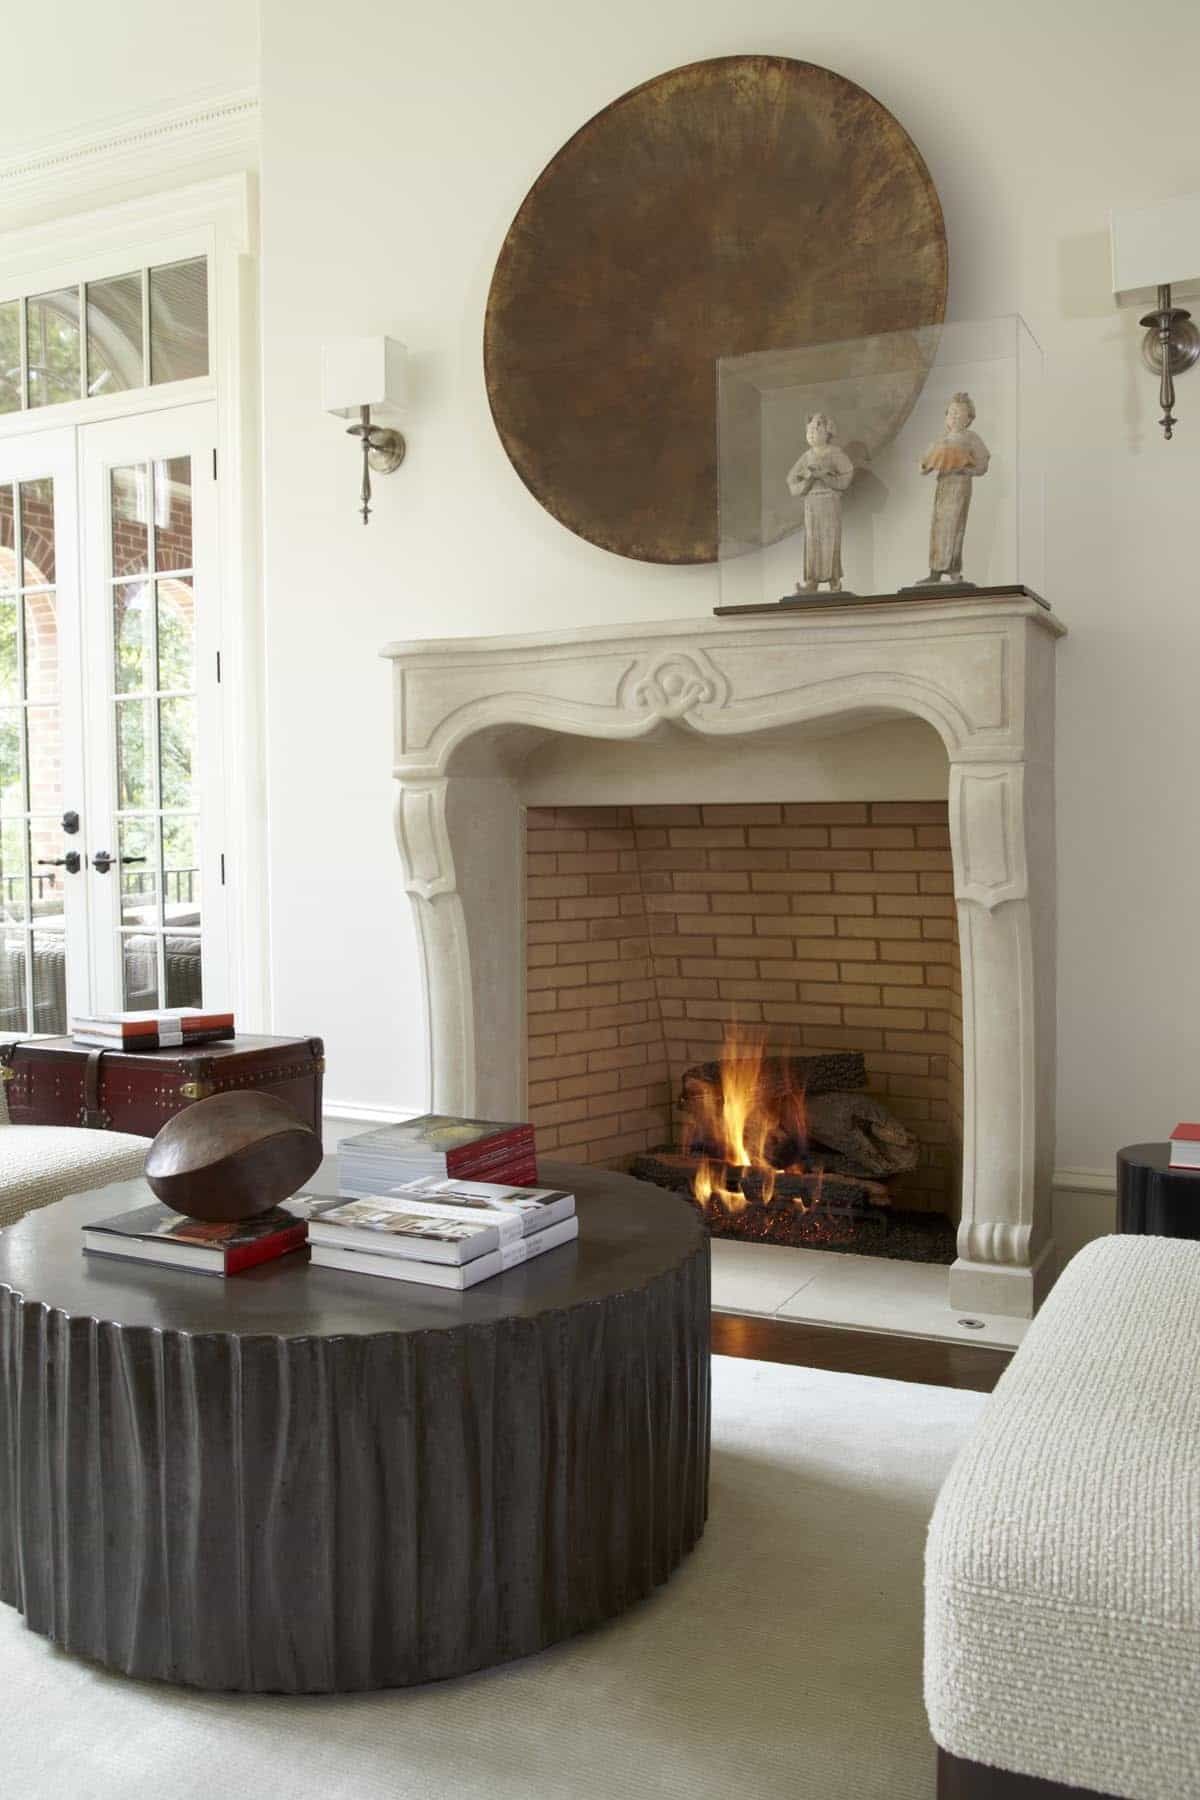 Featured Photo of Asian Living Room With Decorative Fireplace Surround